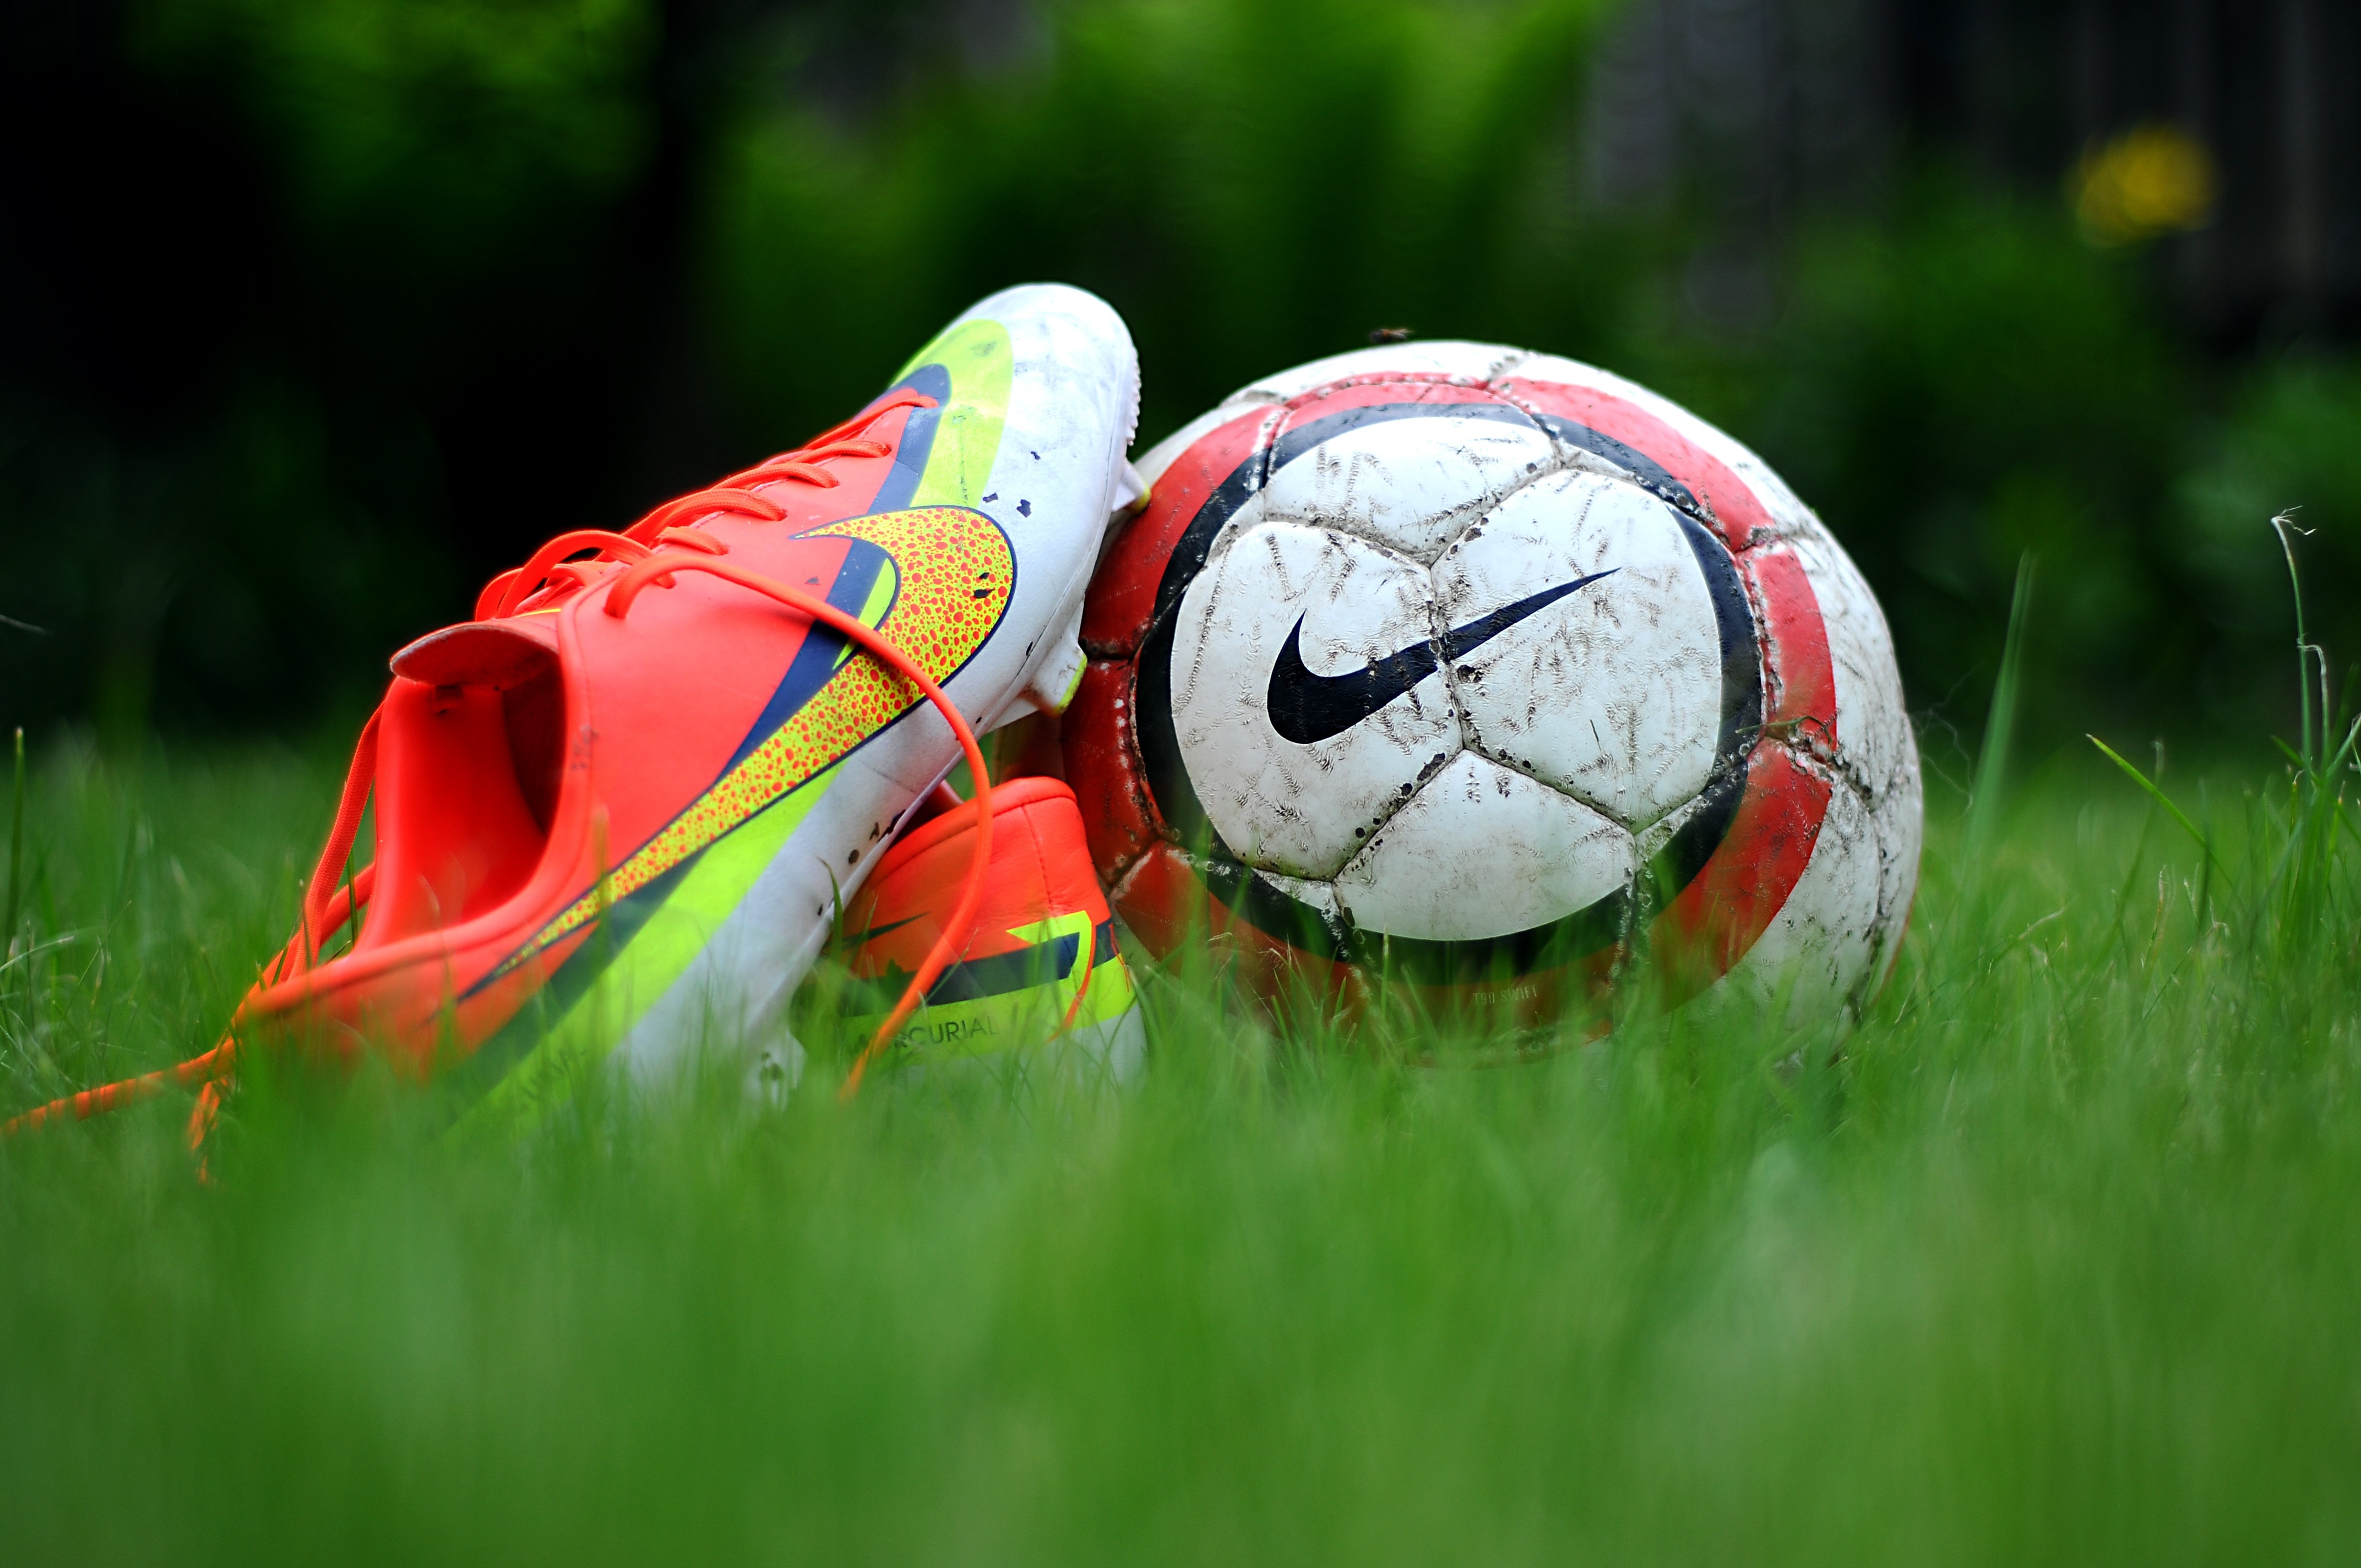 close up photography of Nike soccer cleats and soccer ball on green grass field during daytime